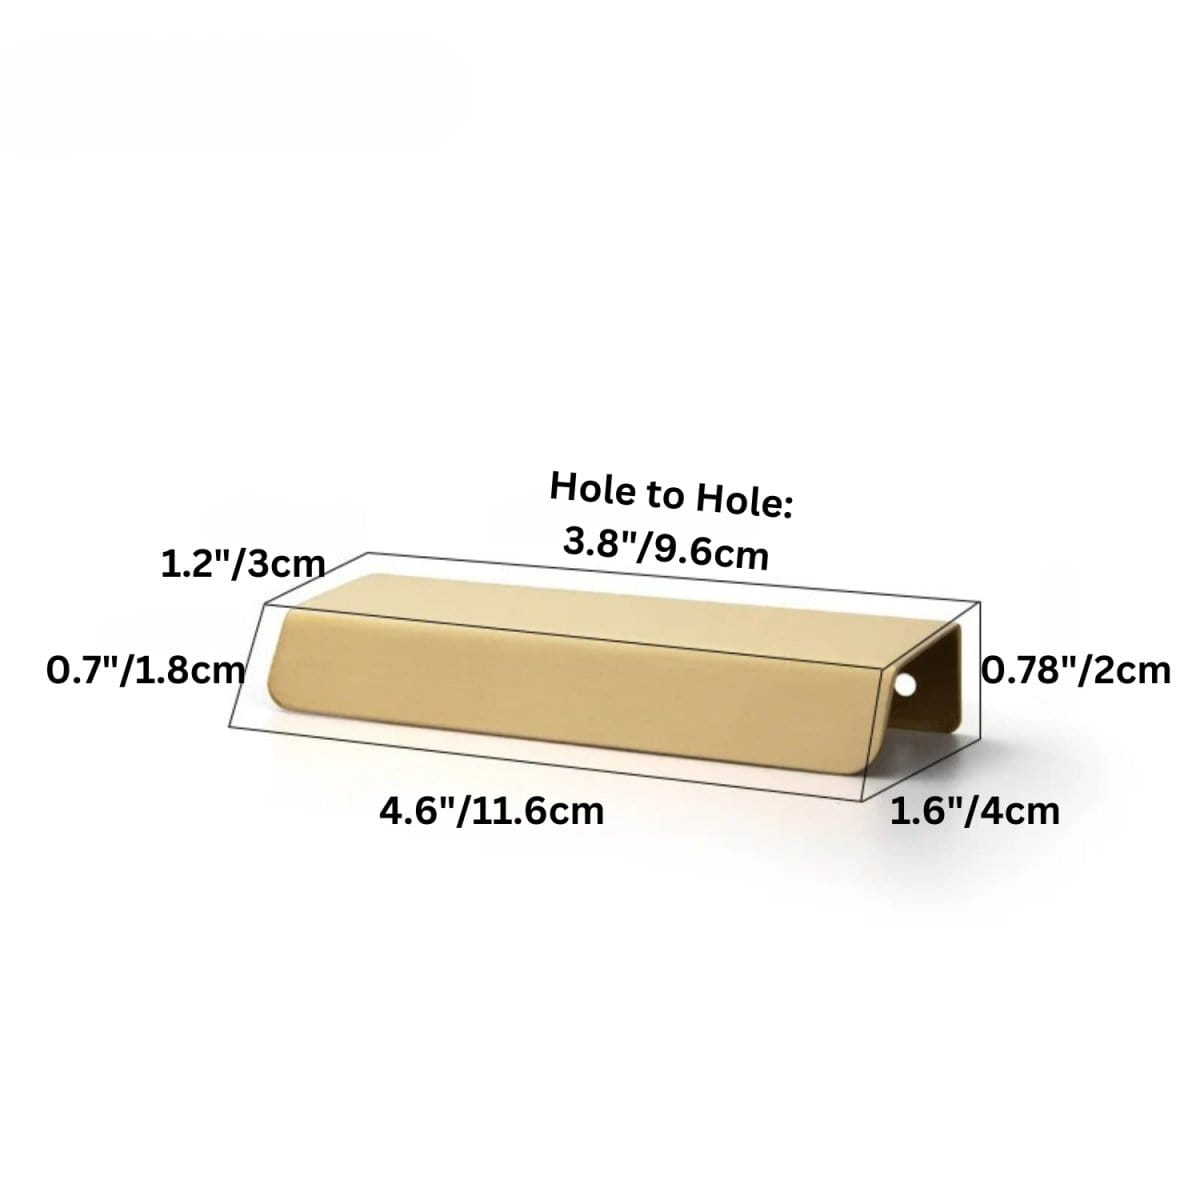 Residence Supply Hole to Hole: 3.8" / 9.6cm Anzah Pull Bar